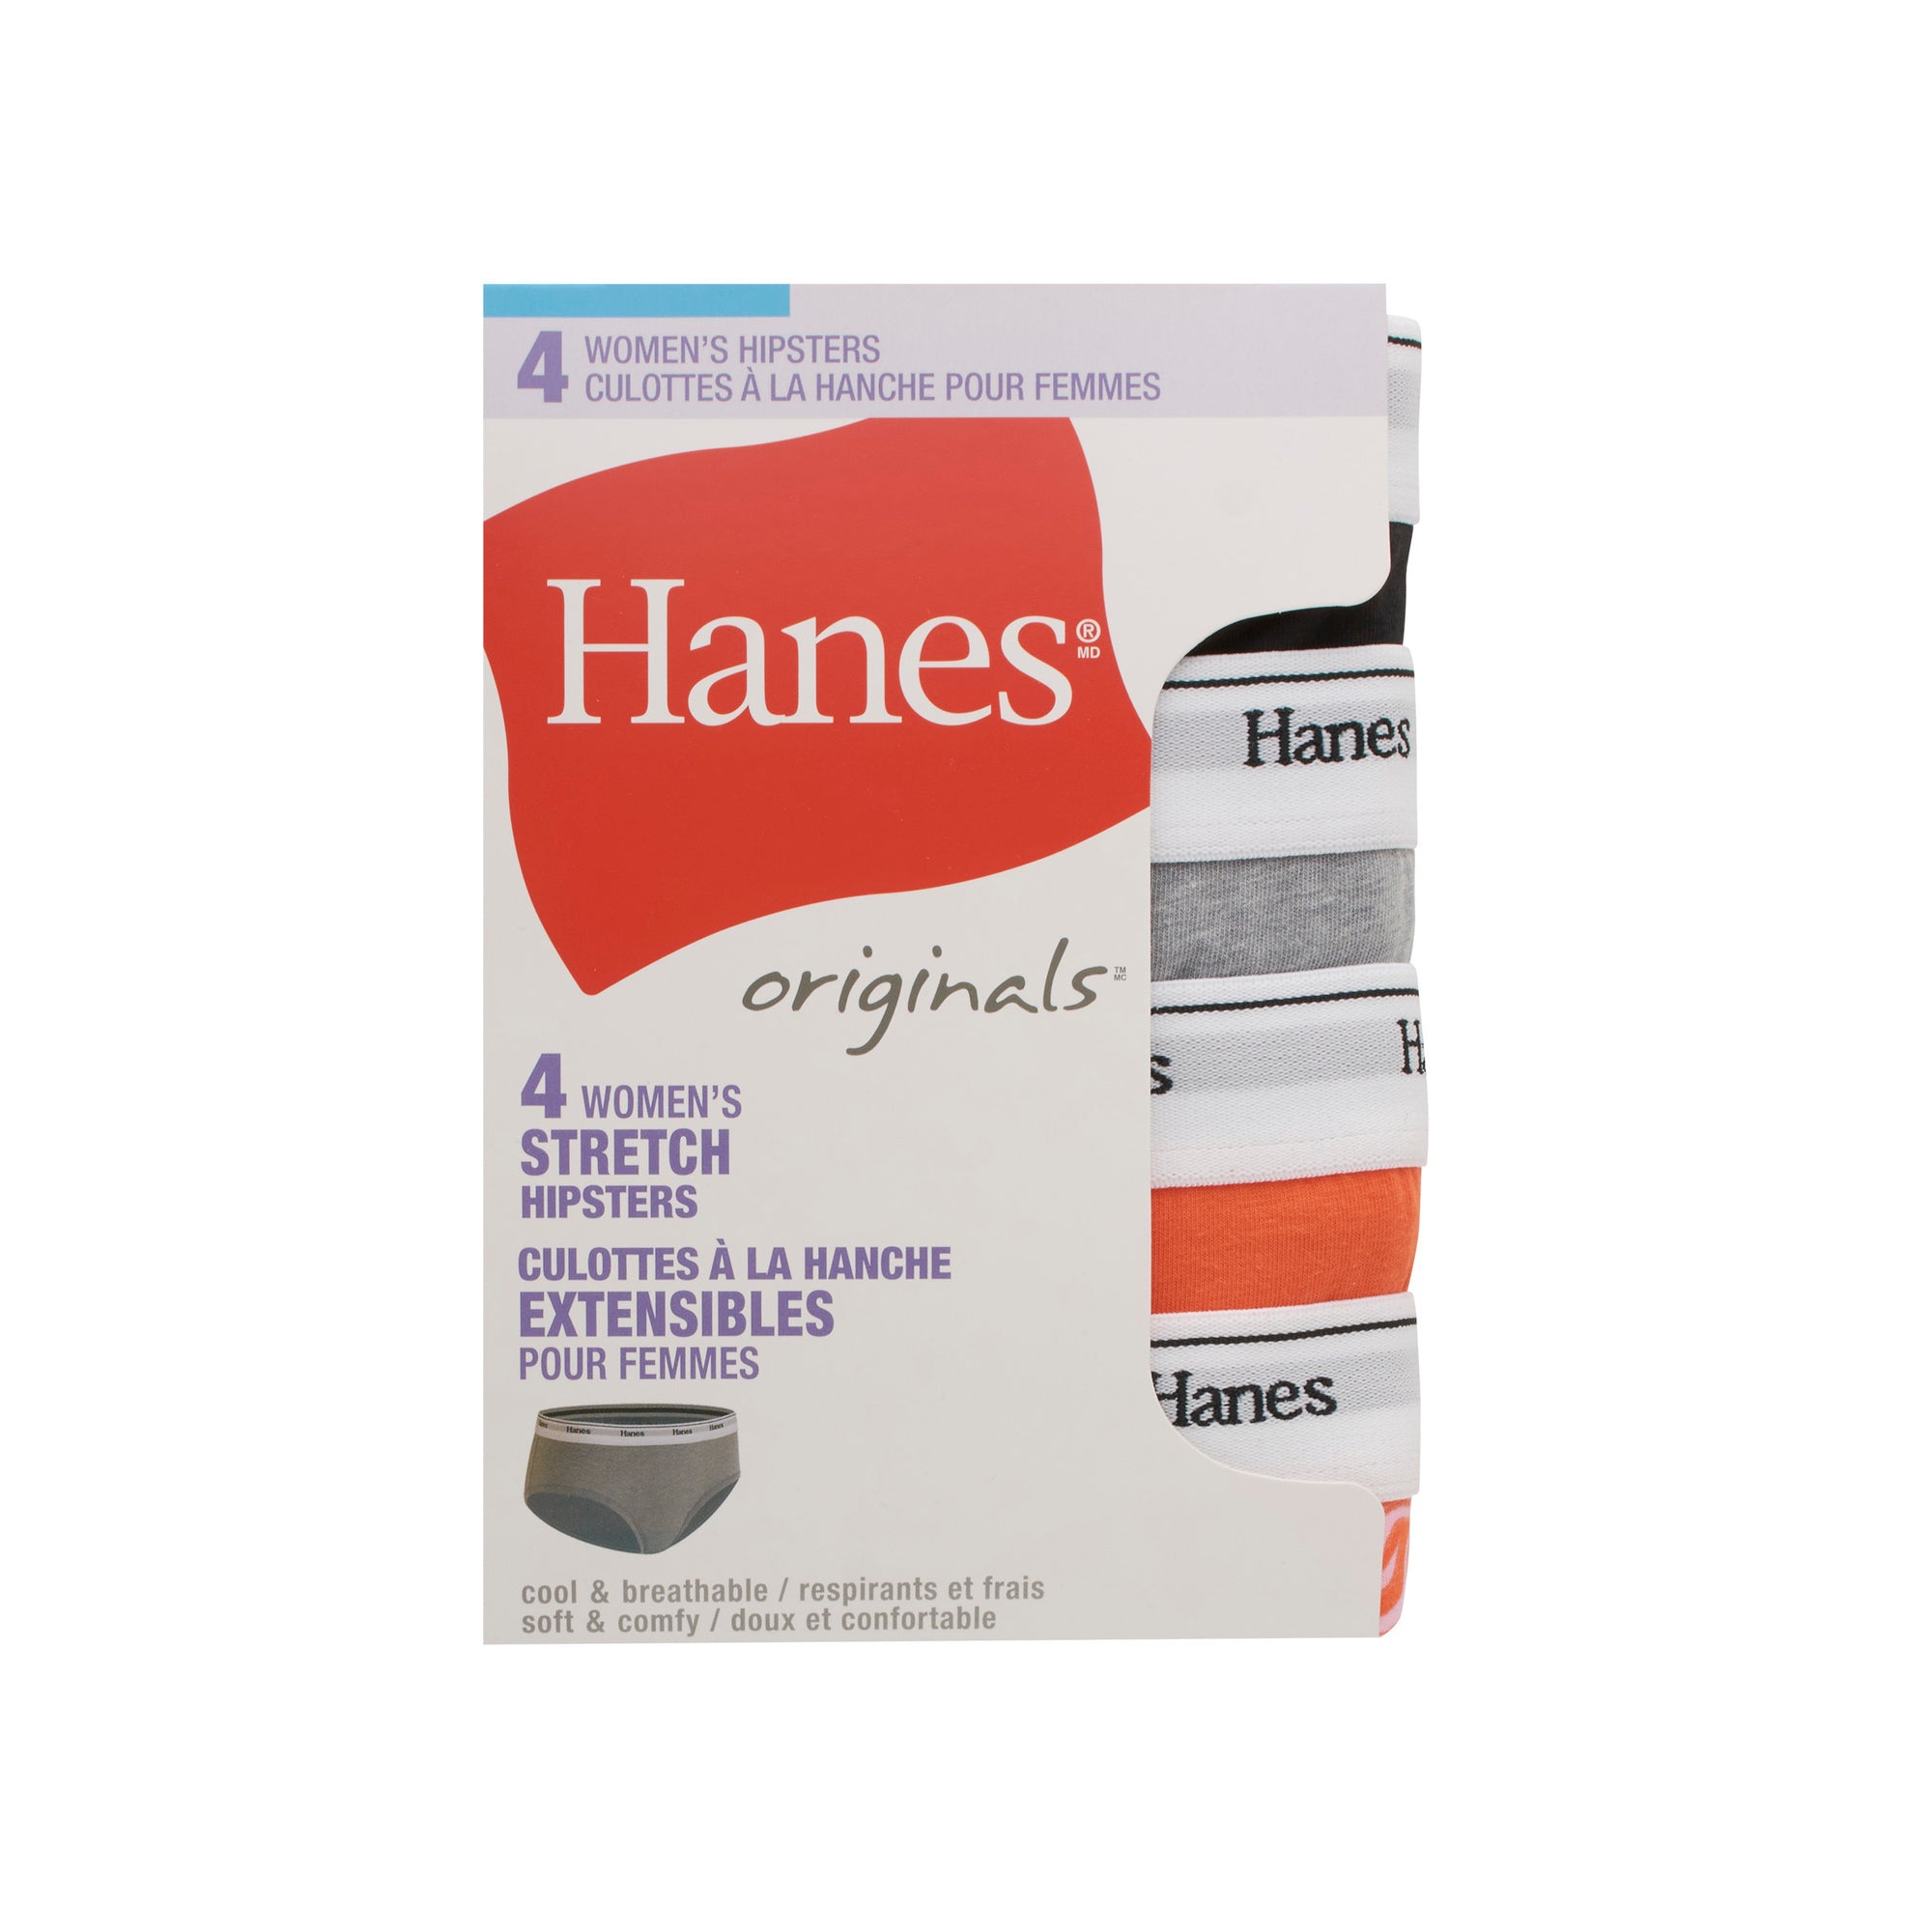 Hanes Women's Cotton 6pk Pp41as Hipster Briefs - Colors May Vary